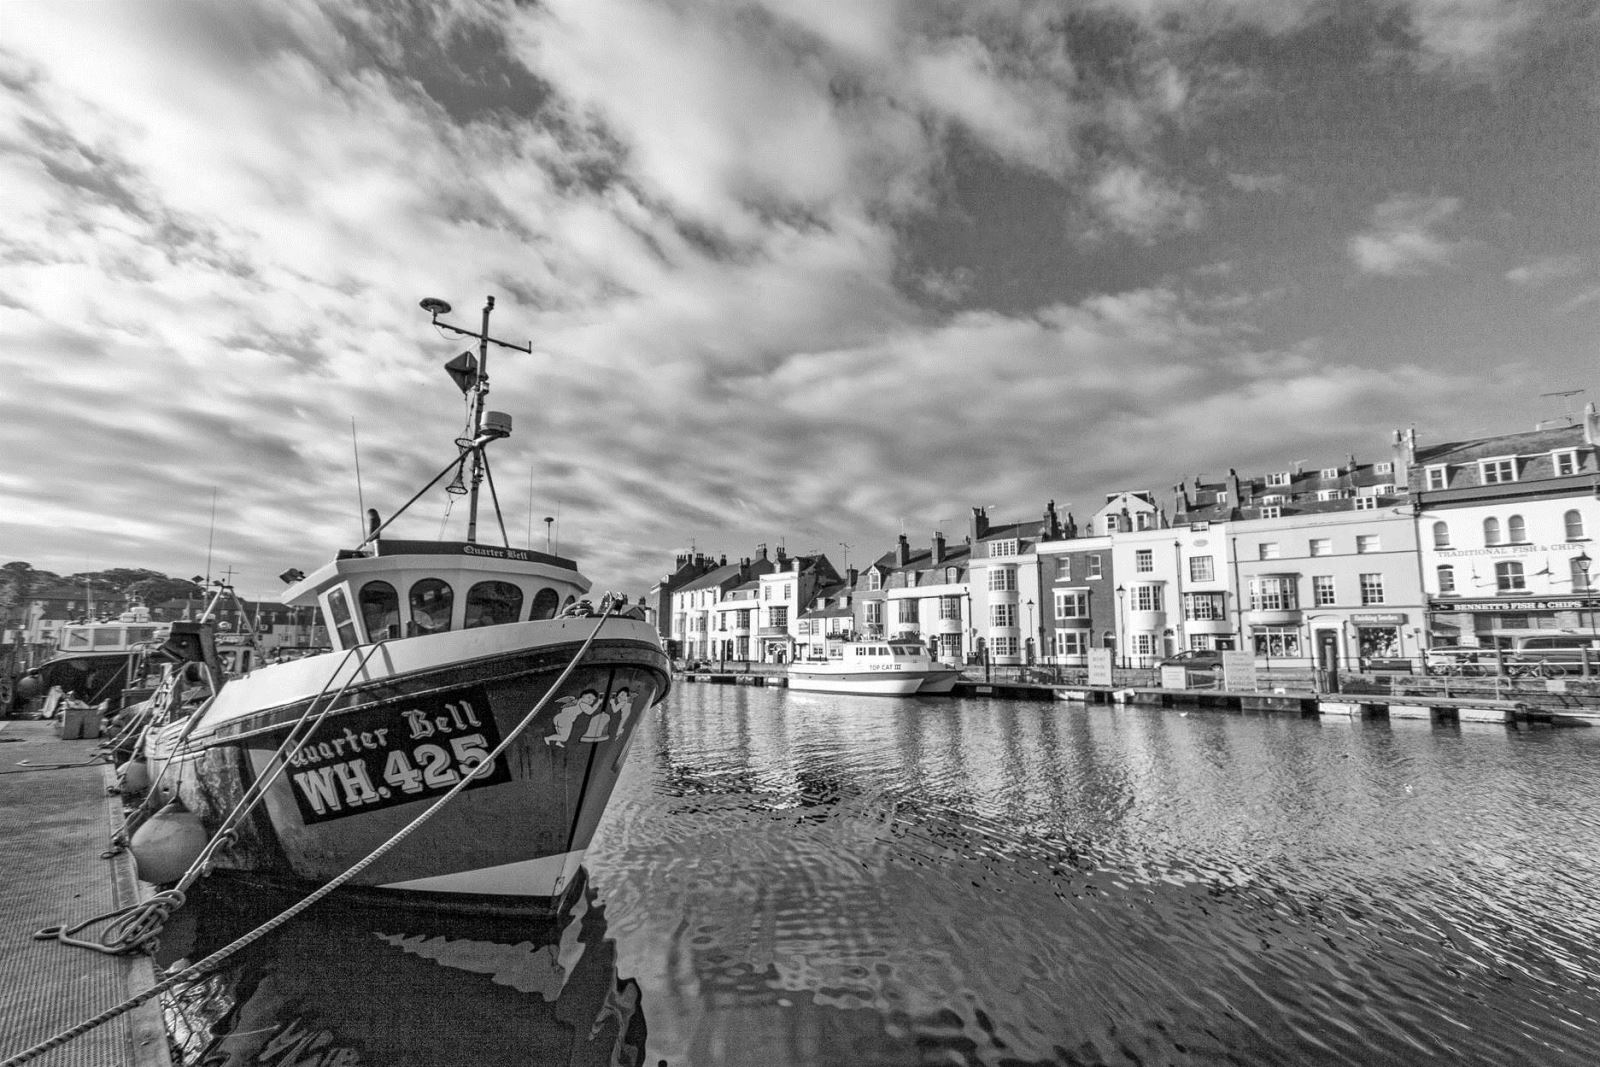 Fishning vessels in Weymouth Harbour 